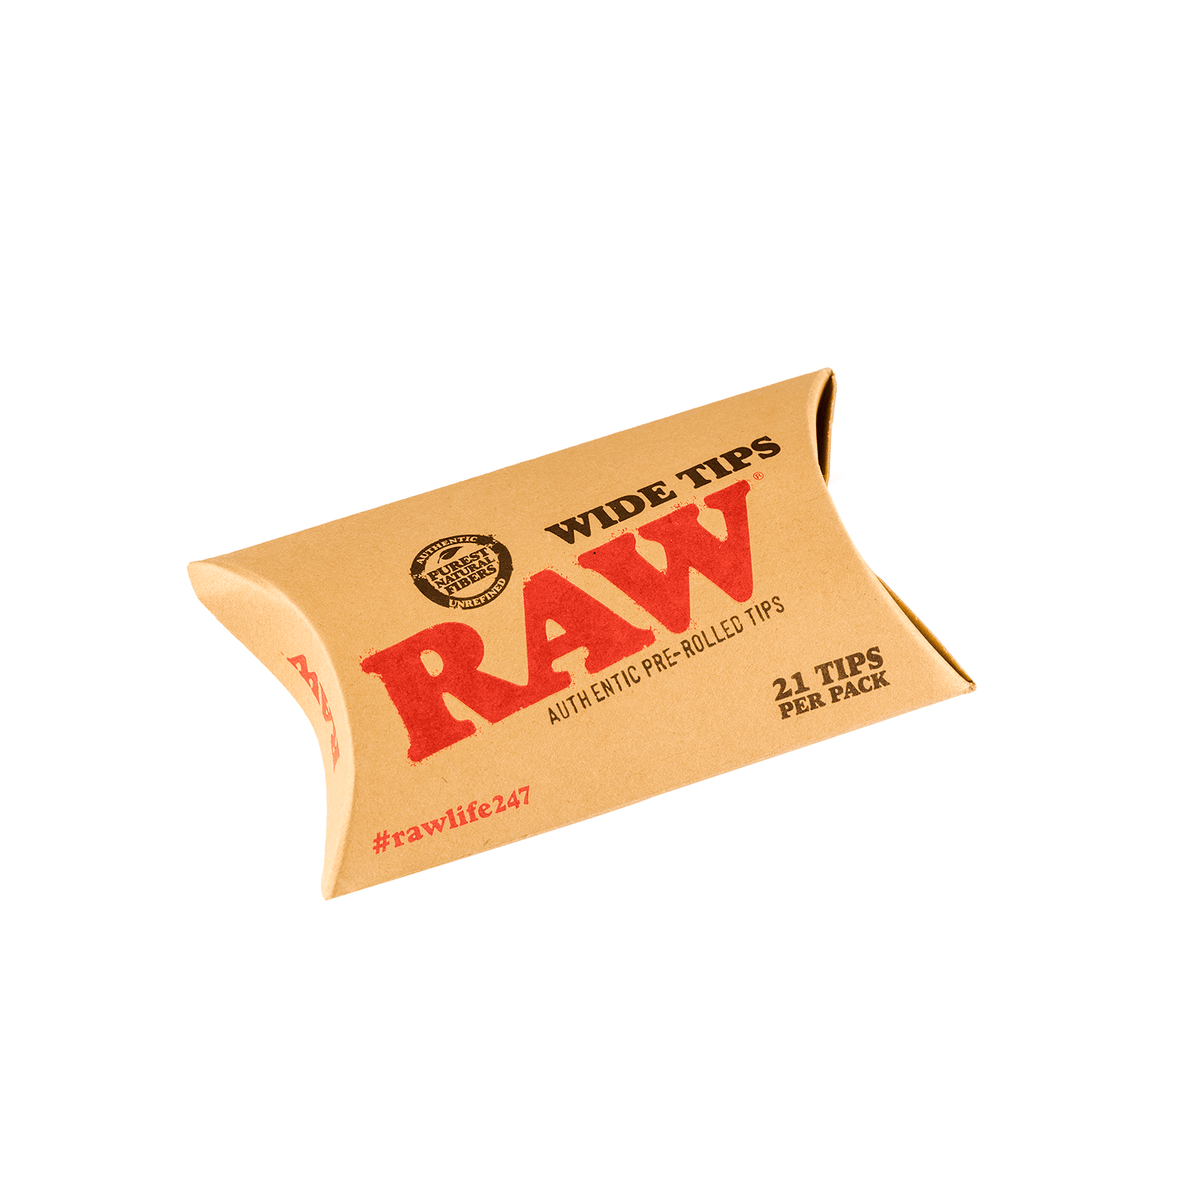 RAW - Pre-Rolled Filter Tips 21ct - HEMPER